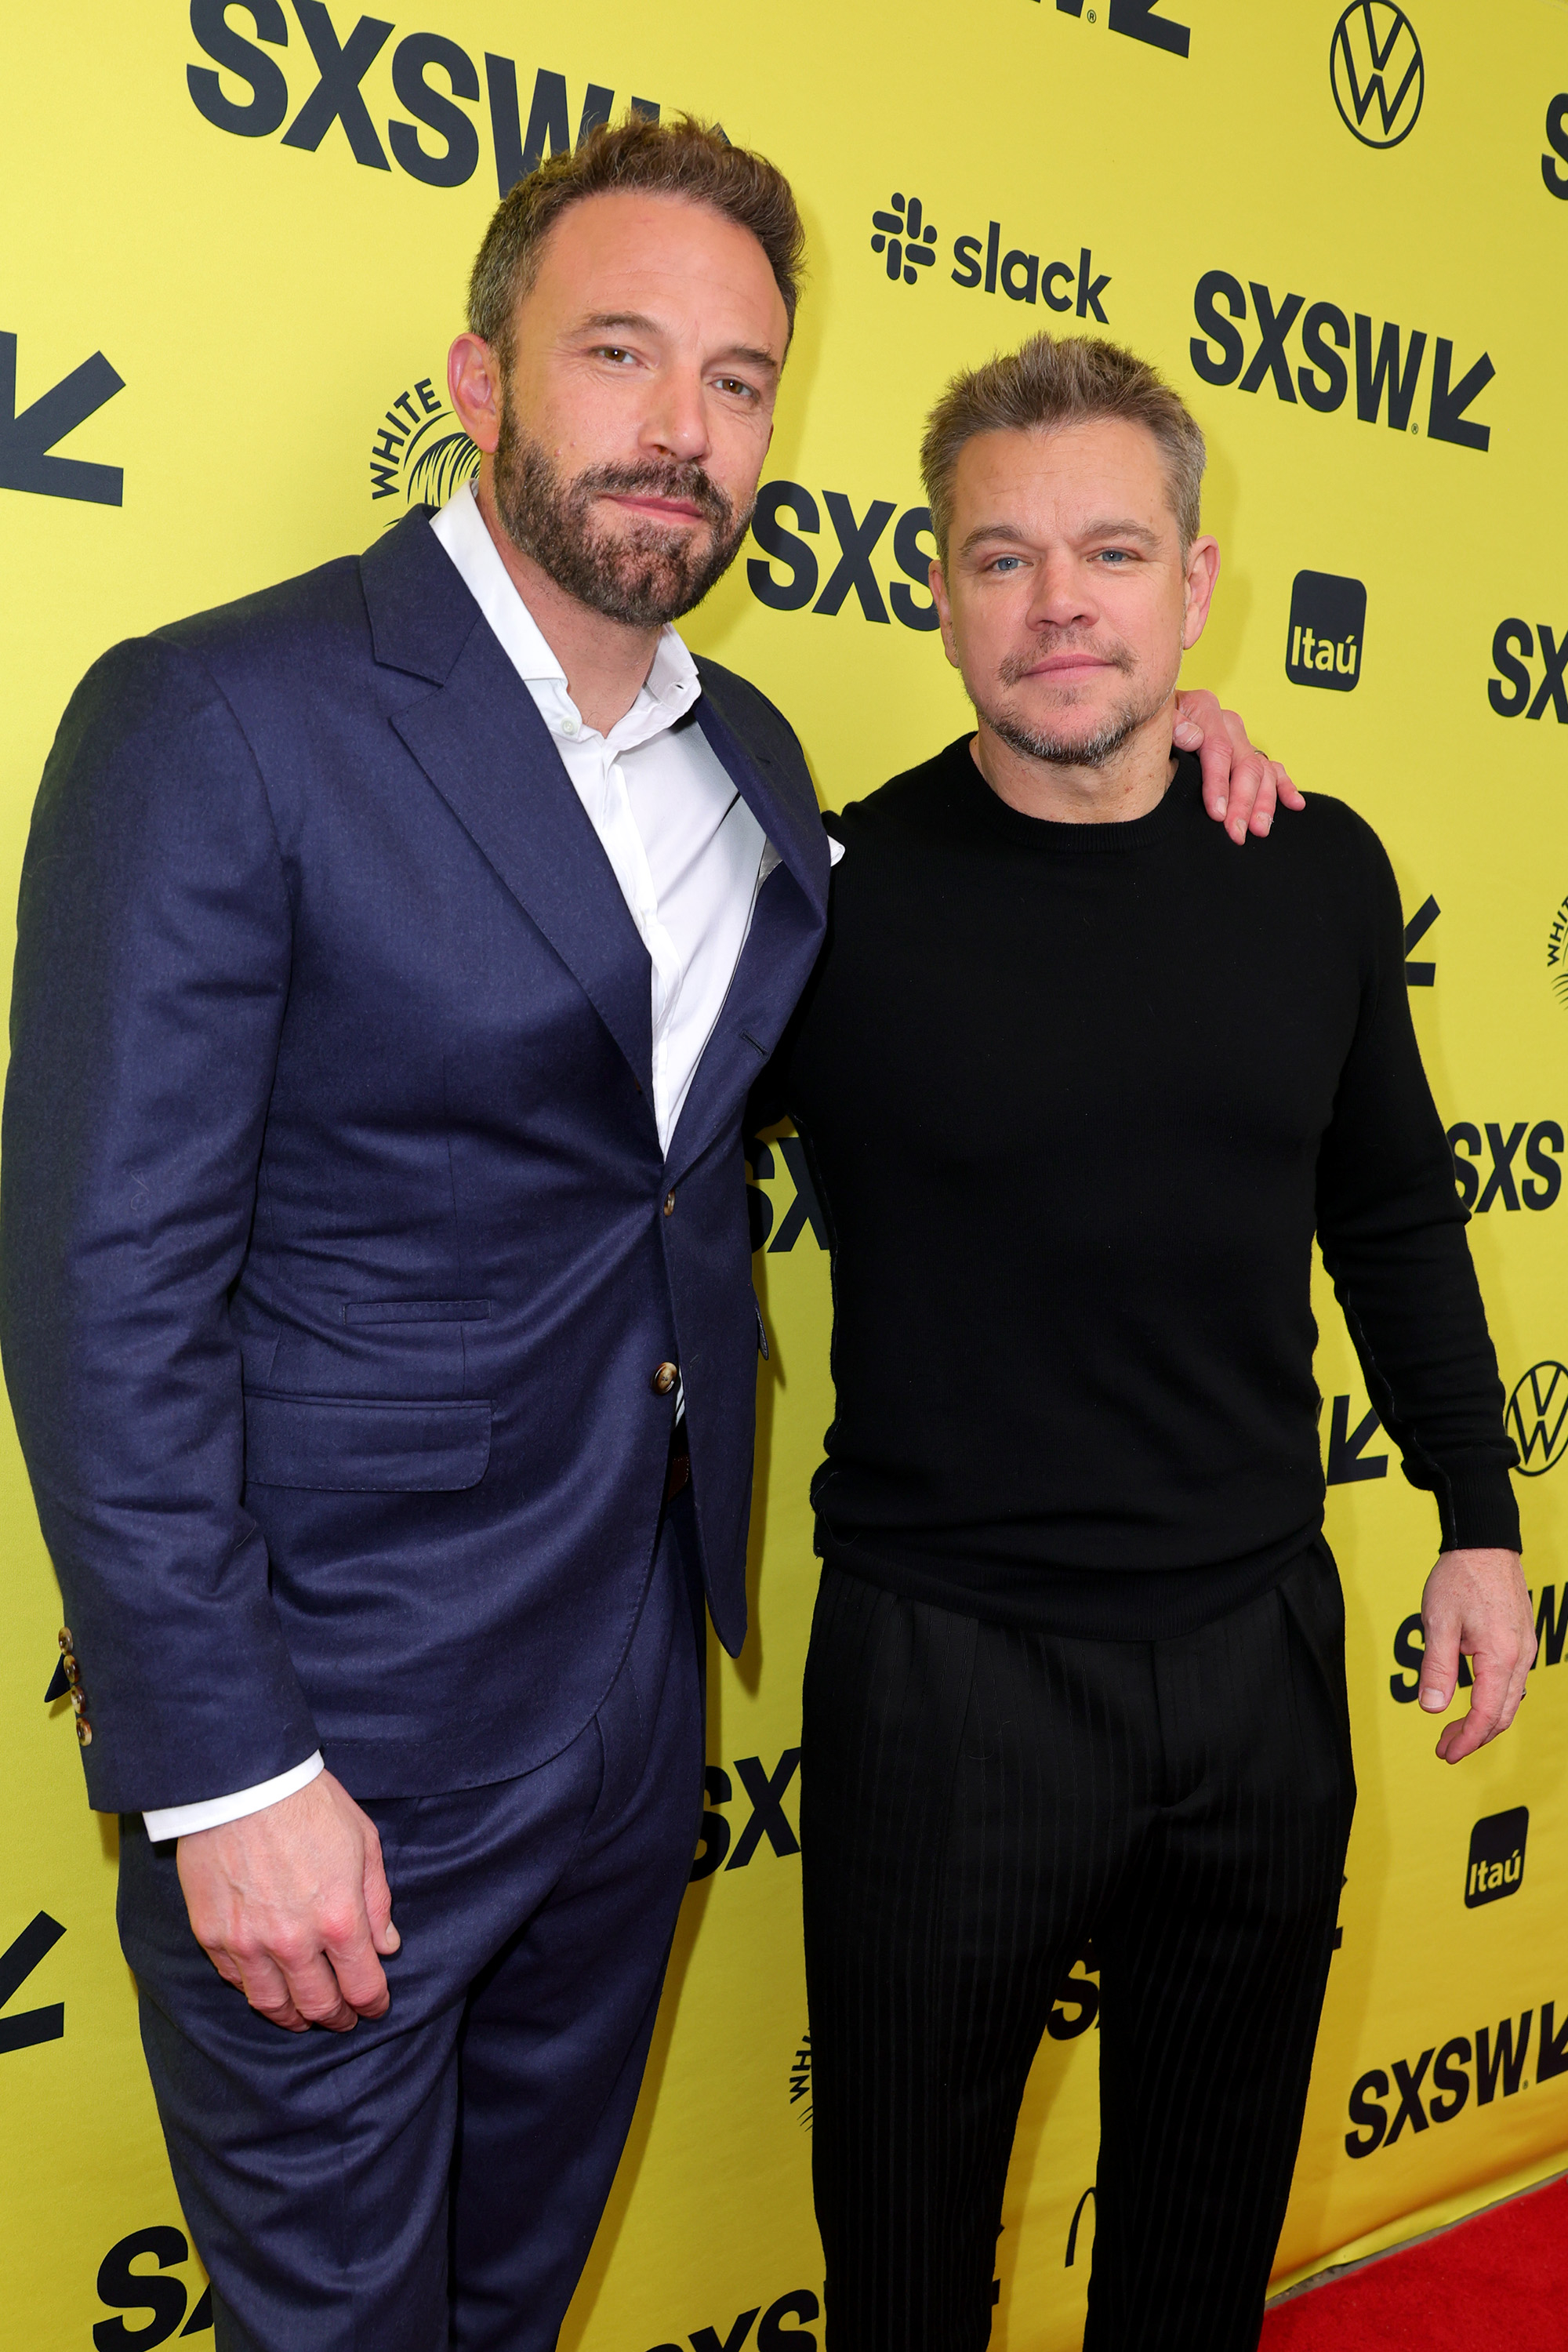 Close-up of Ben and Matt standing together at a media event